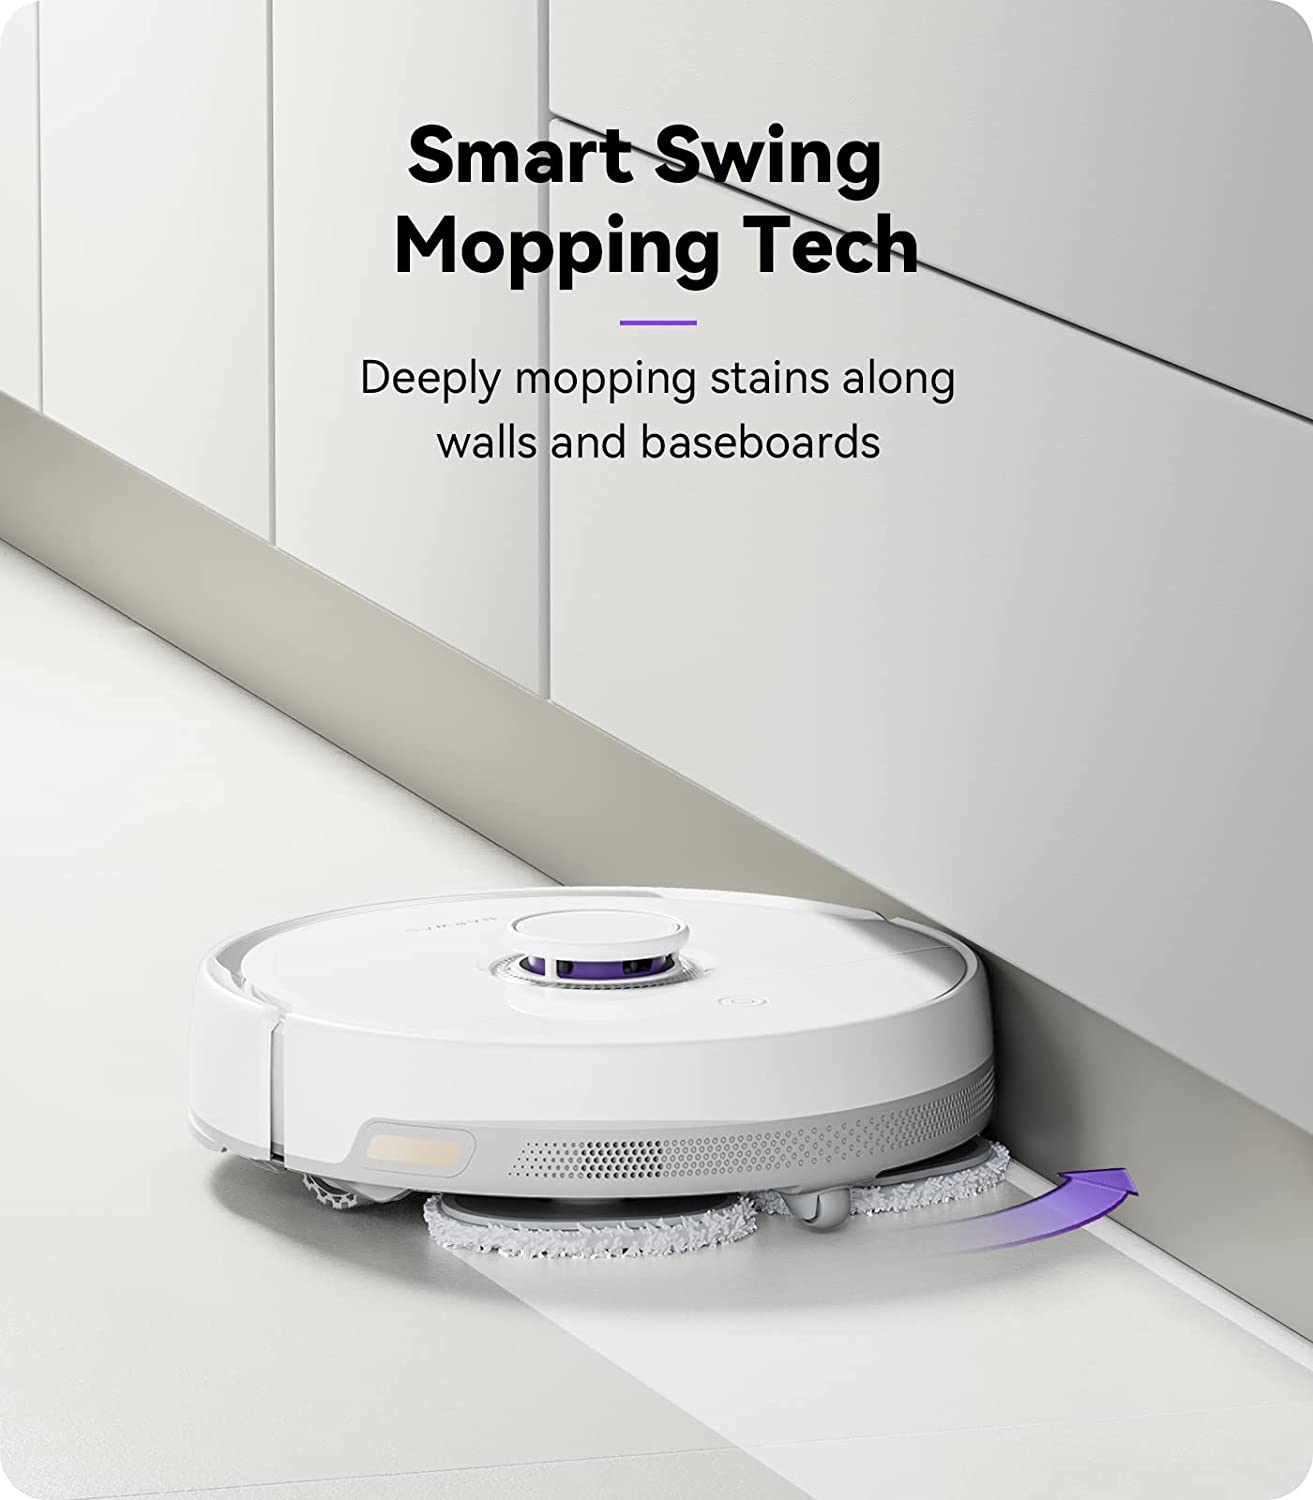 Narwal Freo J3 Robot Vacuum and Mop Combo, Robot Mop and Vacuum with Auto Mop Washing & Drying, Dirt Sense Ultra Clean, Auto Add Cleaner, LCD Display, Smart Swing, Arcuate-Route, Wifi, APP Control, White